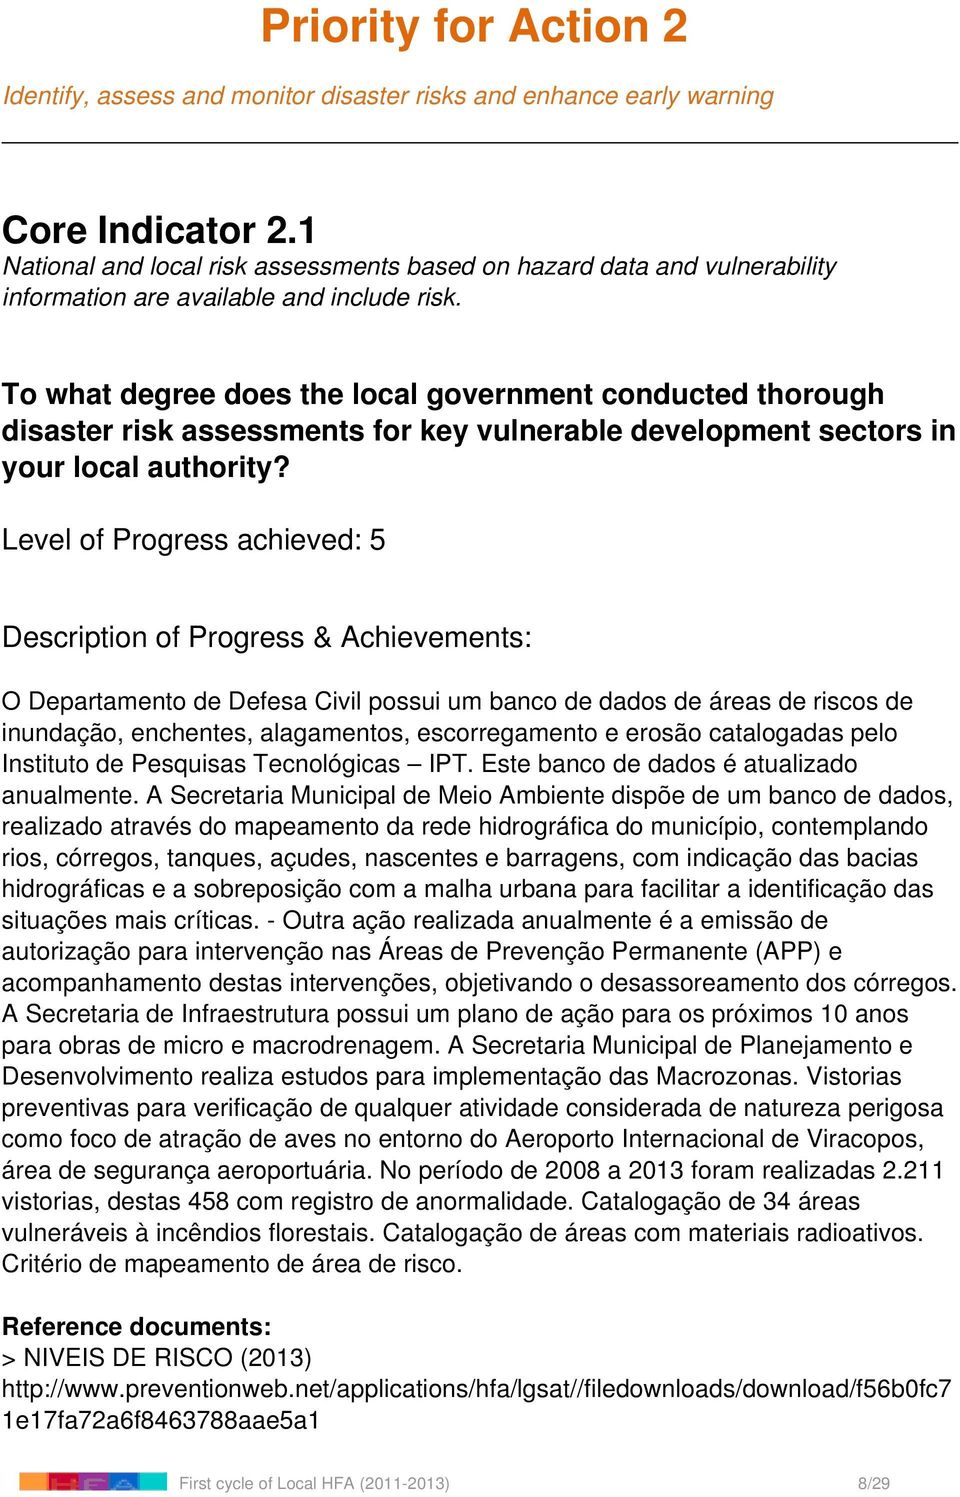 To what degree does the local government conducted thorough disaster risk assessments for key vulnerable development sectors in your local authority?